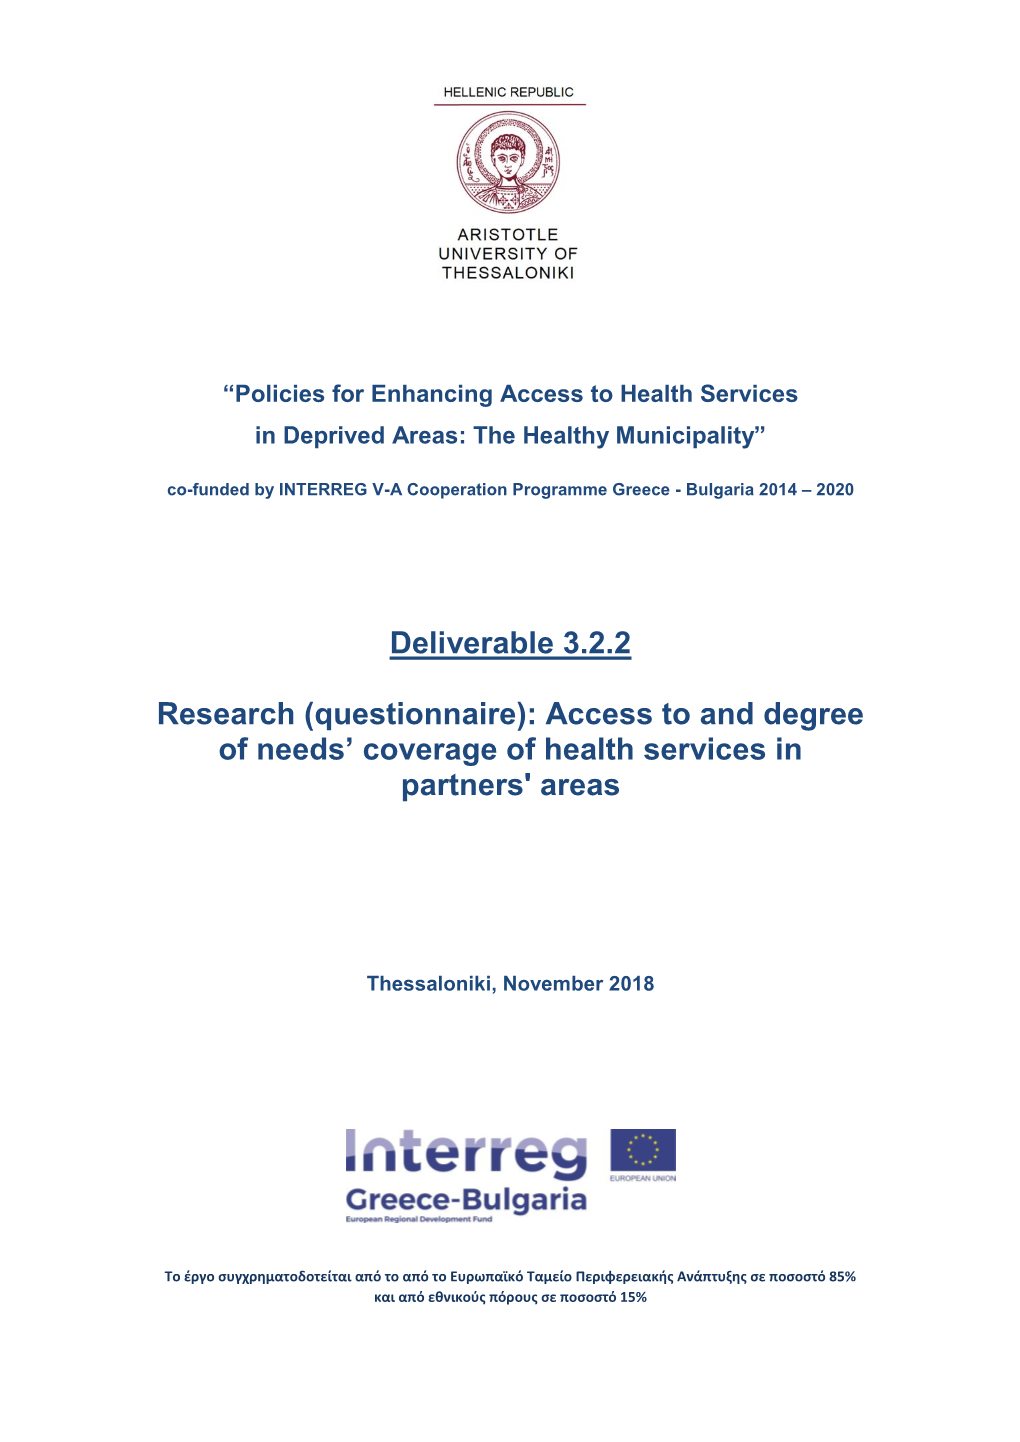 Access to and Degree of Needs' Coverage of Health Services In